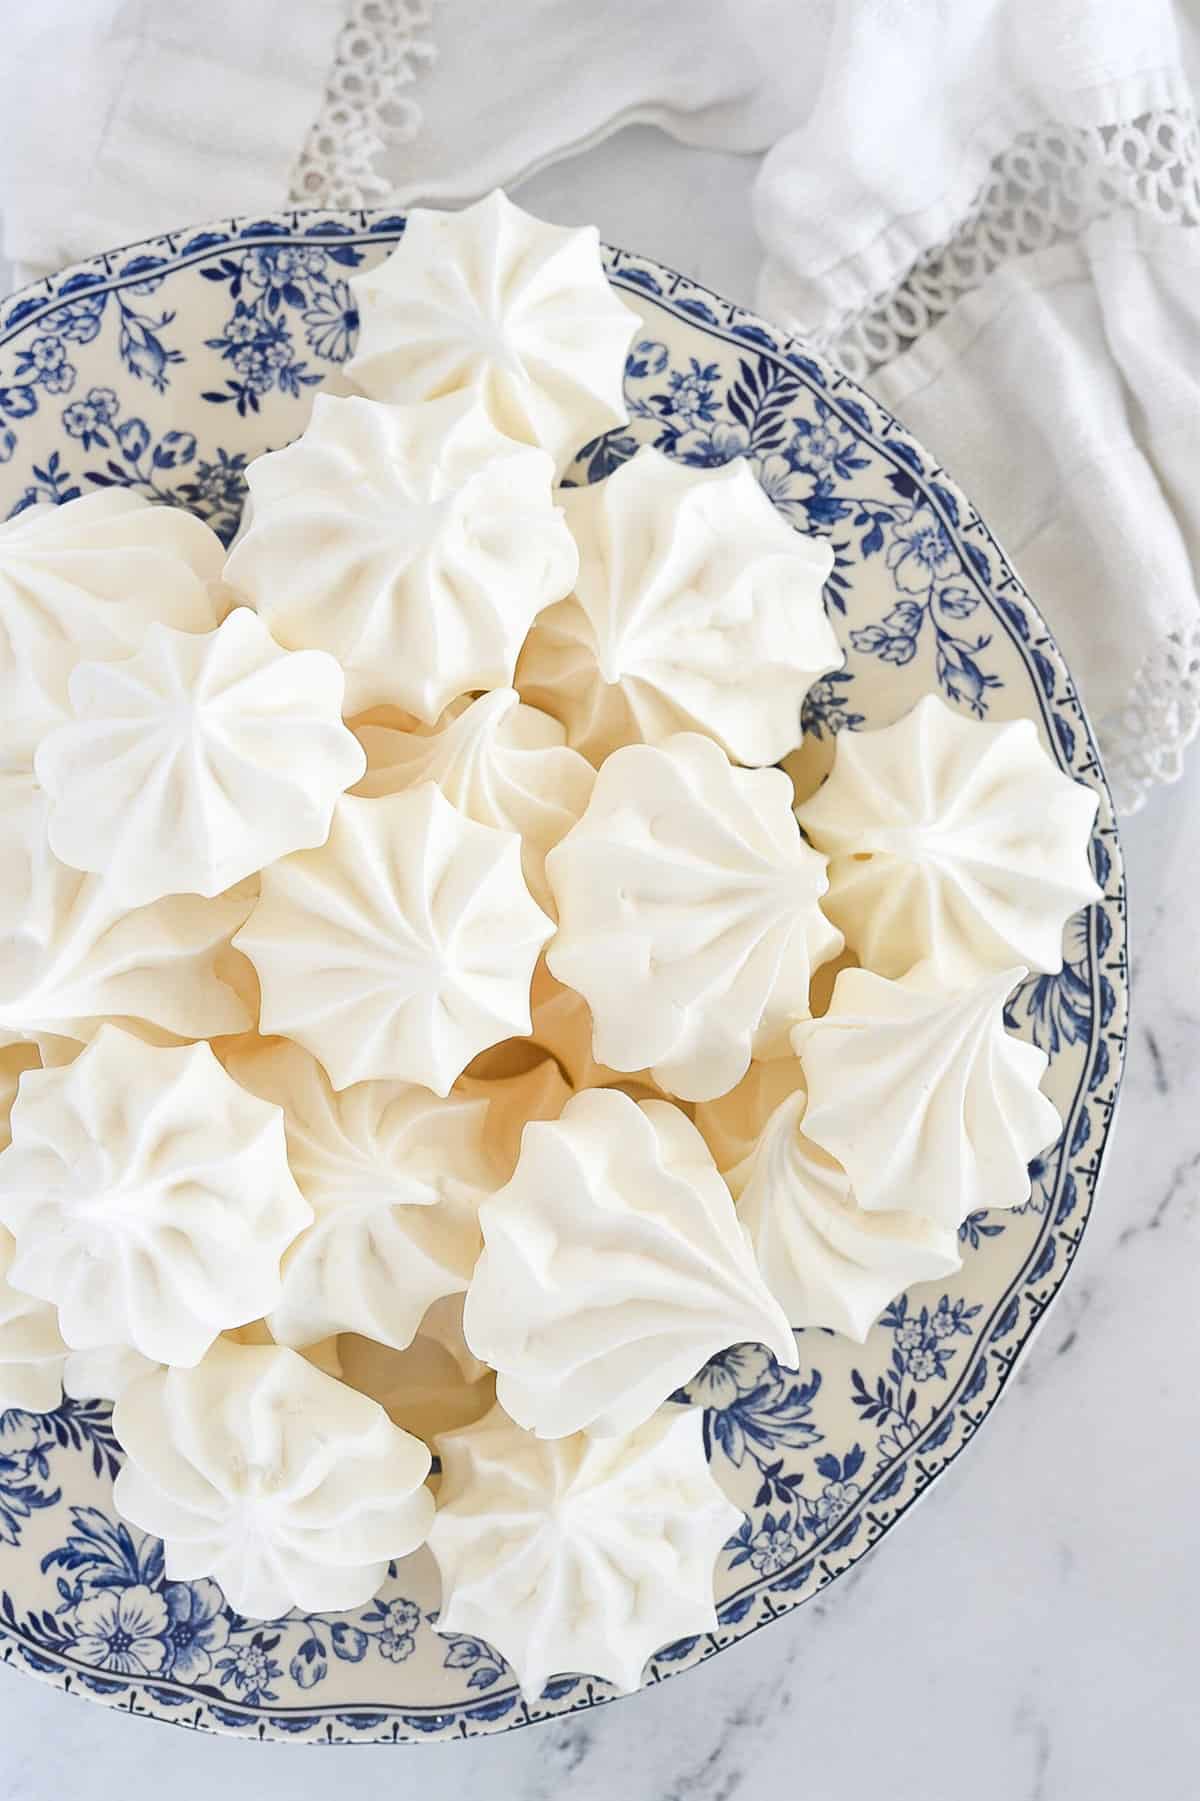 meringue cookies on a blue and white plate